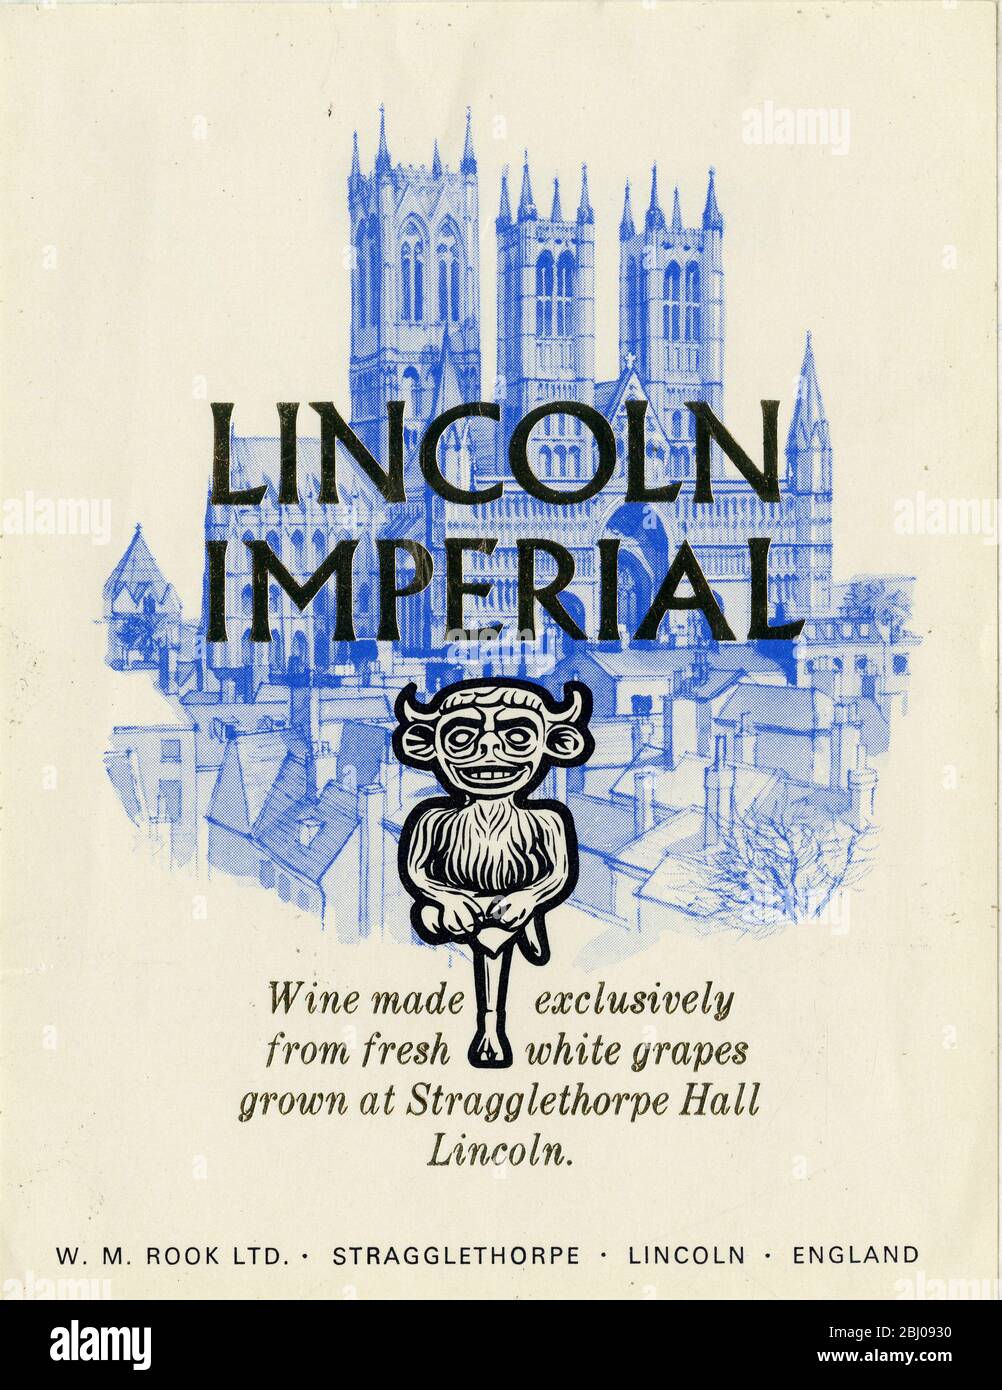 Wine Label. - Lincoln Imperial. Wine made exclusively from fresh white grapes grown at Stragglethorpe Hall Lincoln. - W.M Rook Ltd. Stragglethorpe. Lincoln. England. Stock Photo